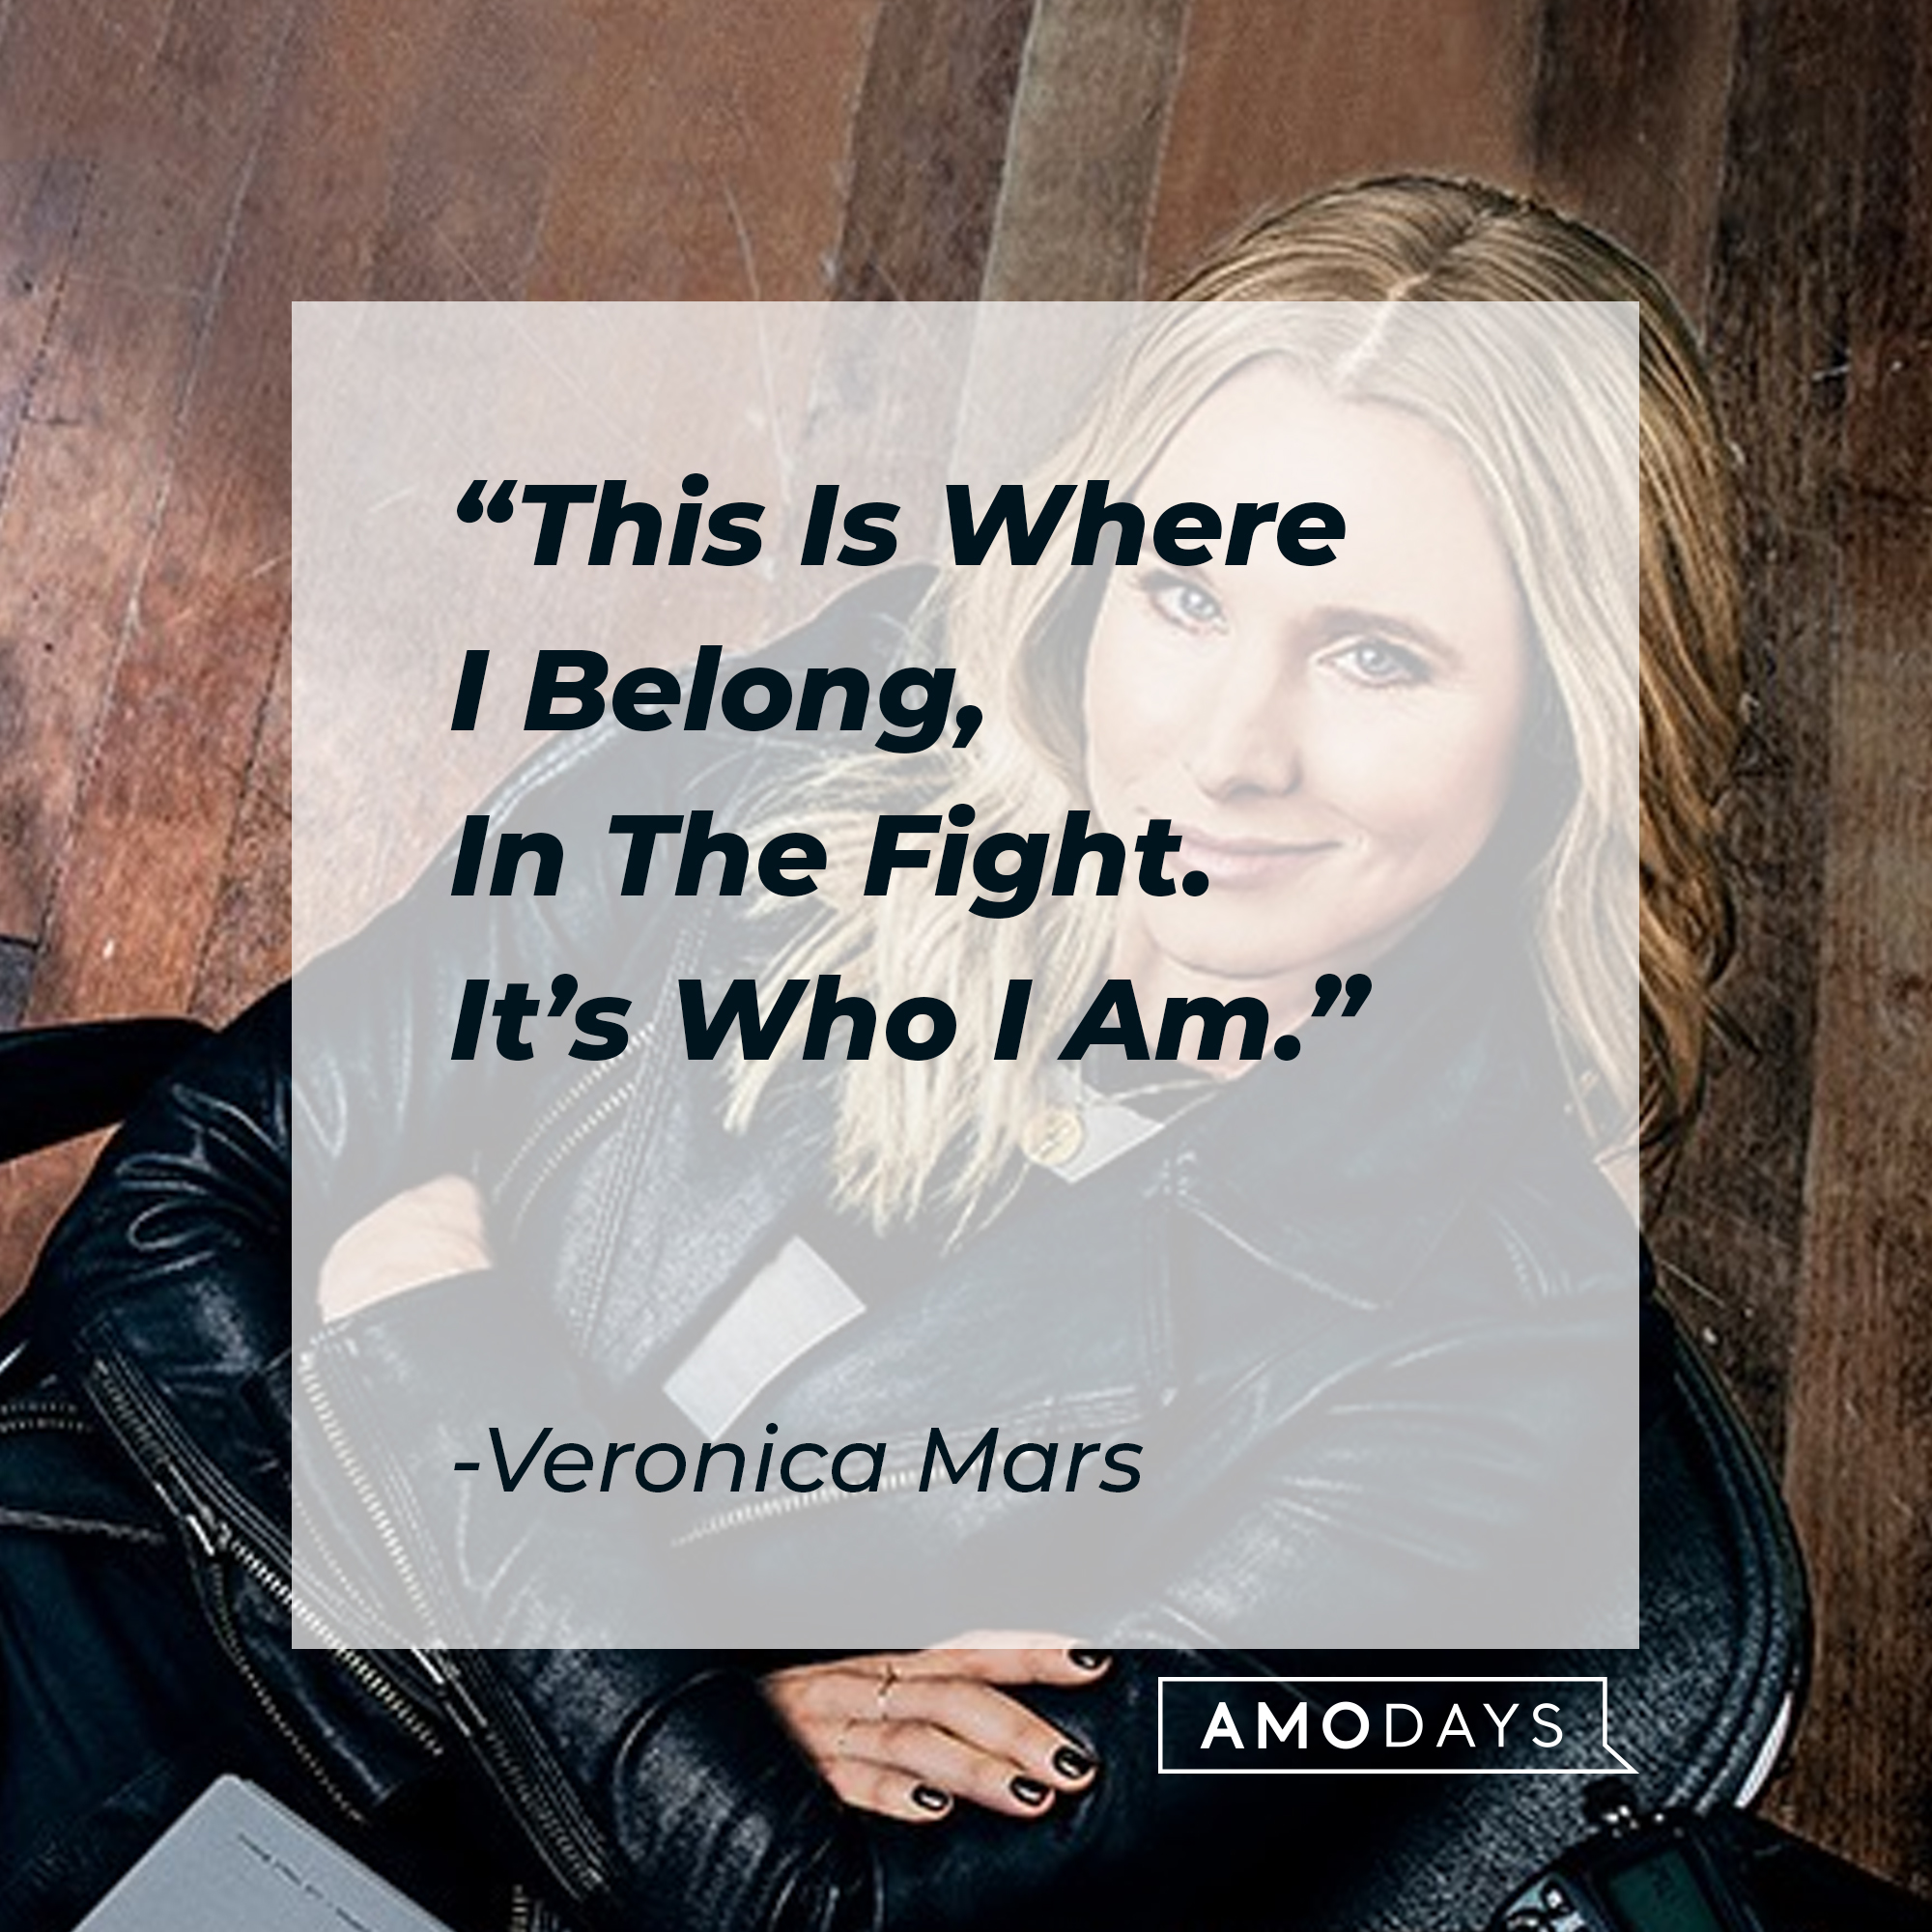 Veronica Mars' quote: “This Is Where I Belong, In The Fight. It’s Who I Am.” | Source: facebook.com/VeronicaMars